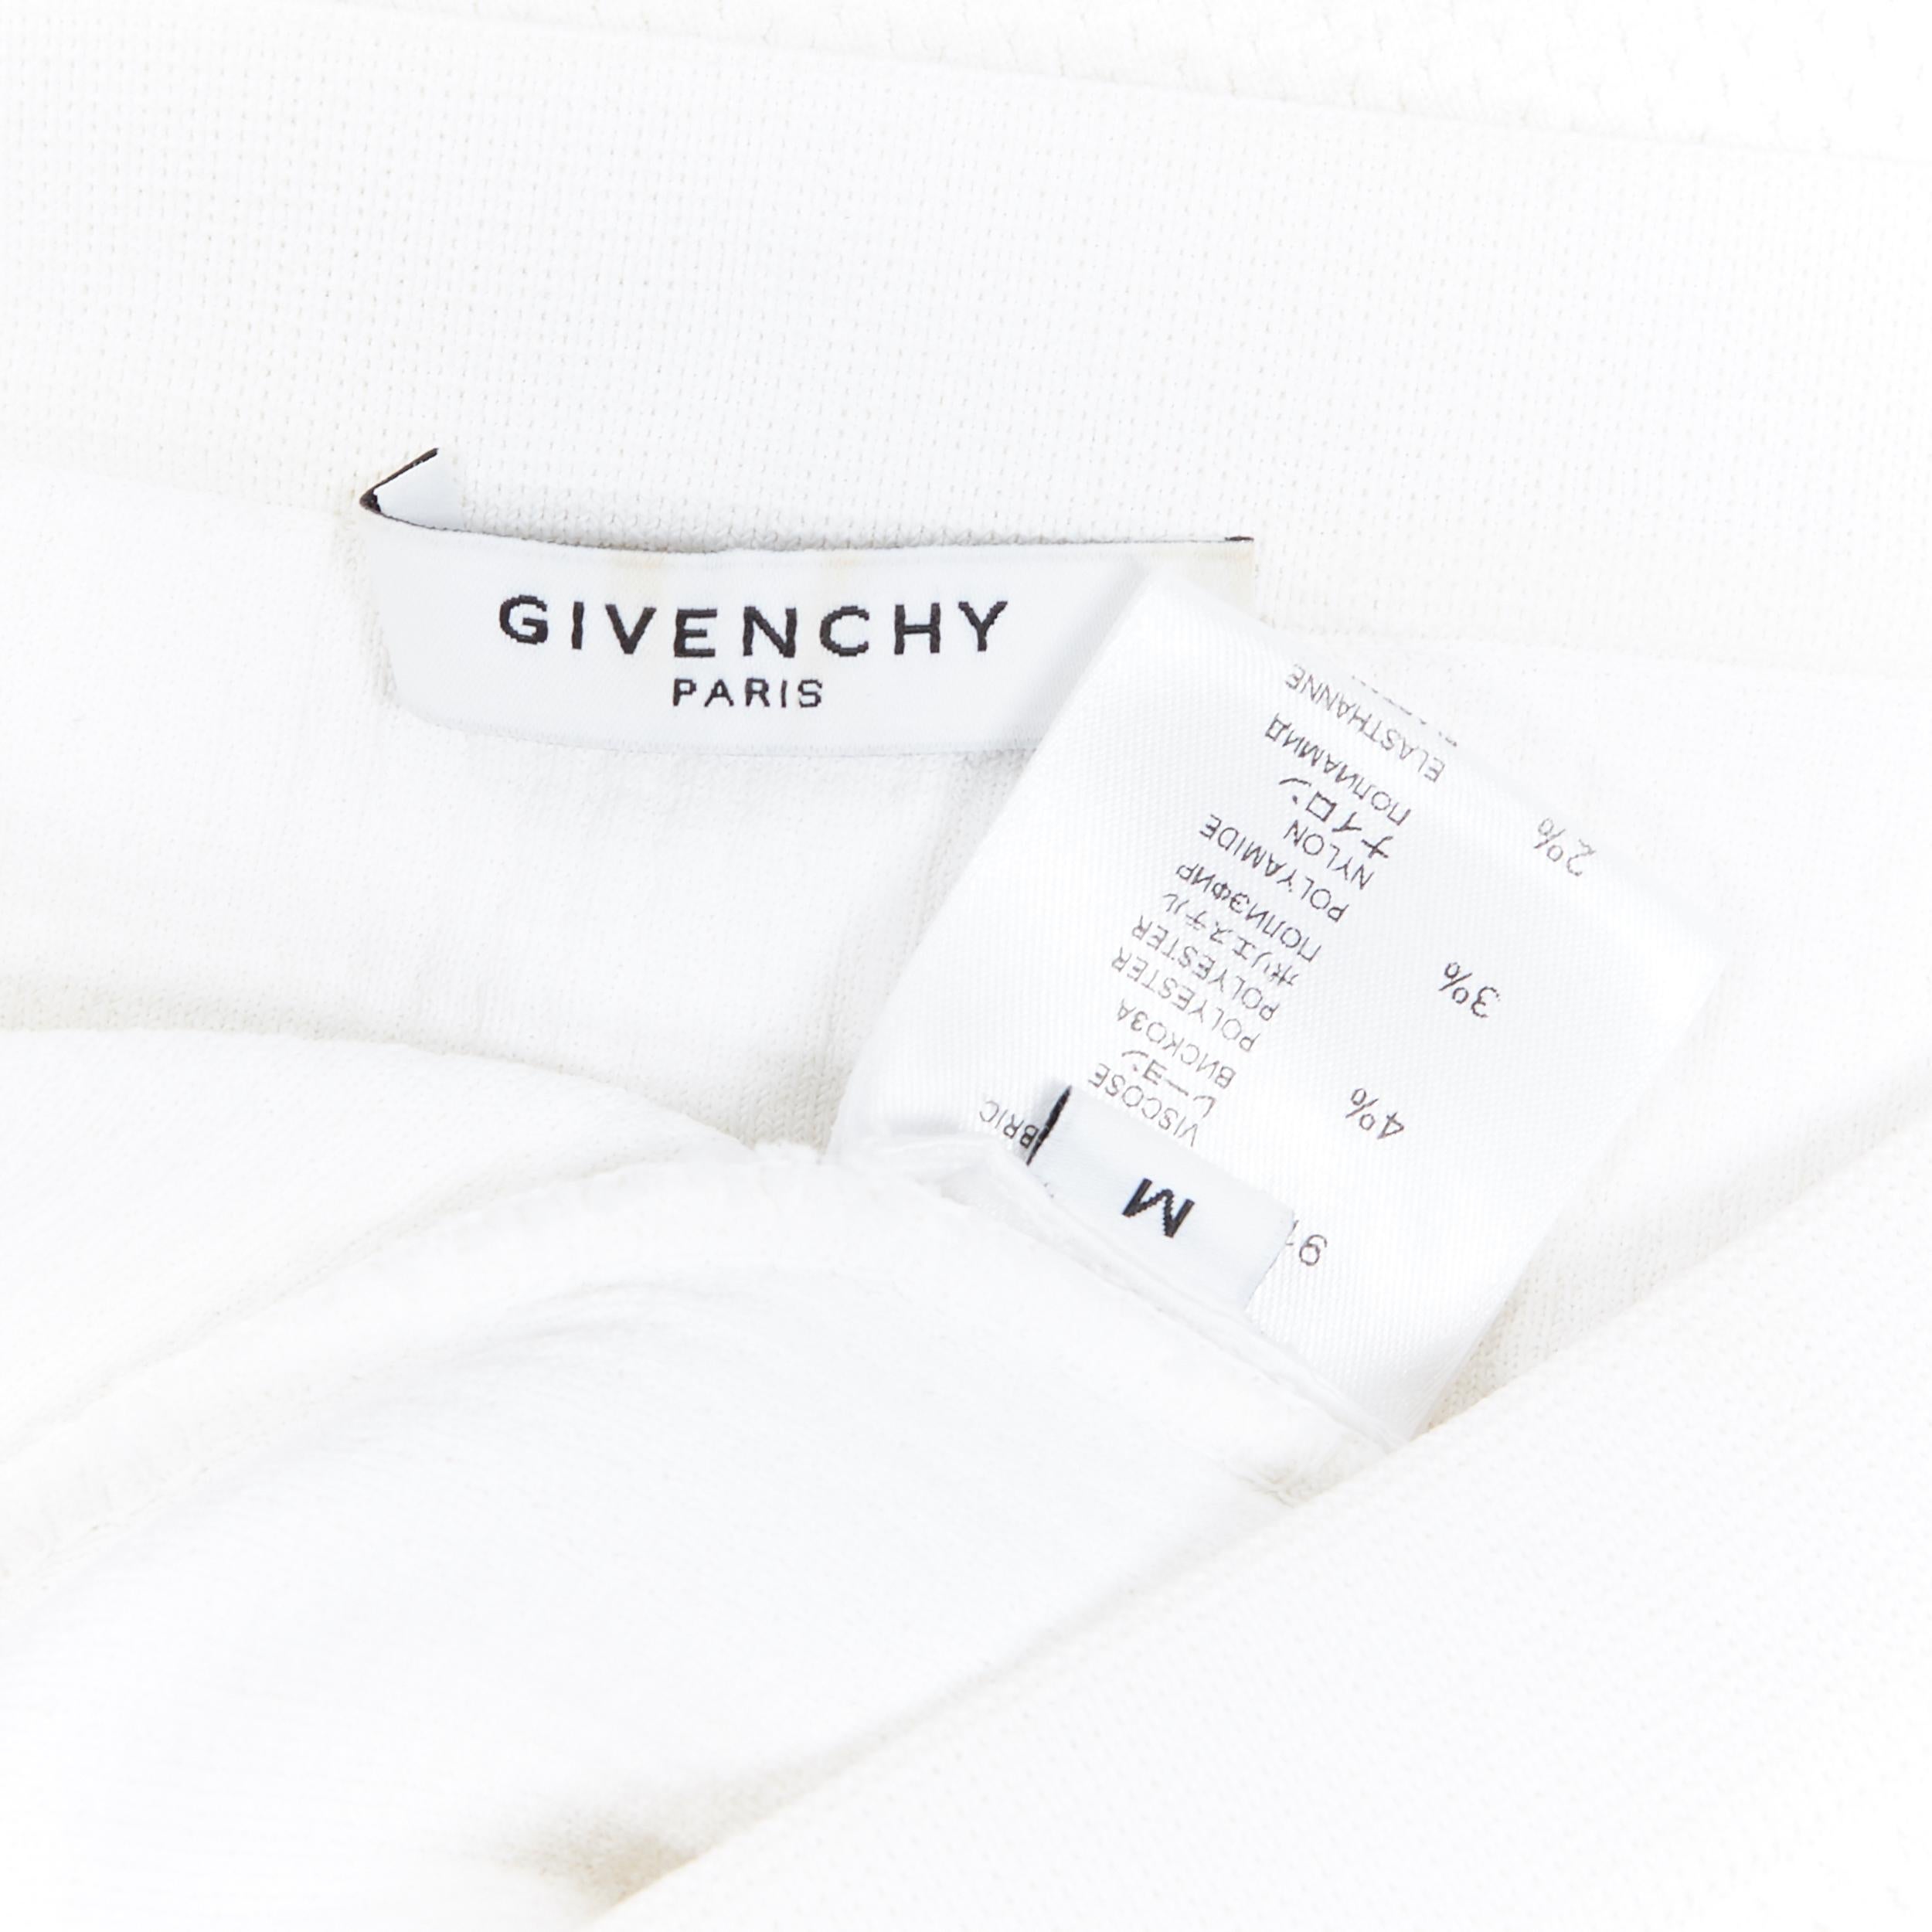 GIVENCHY TISCI viscose blend knitted white curved front bodycon skirt M 27